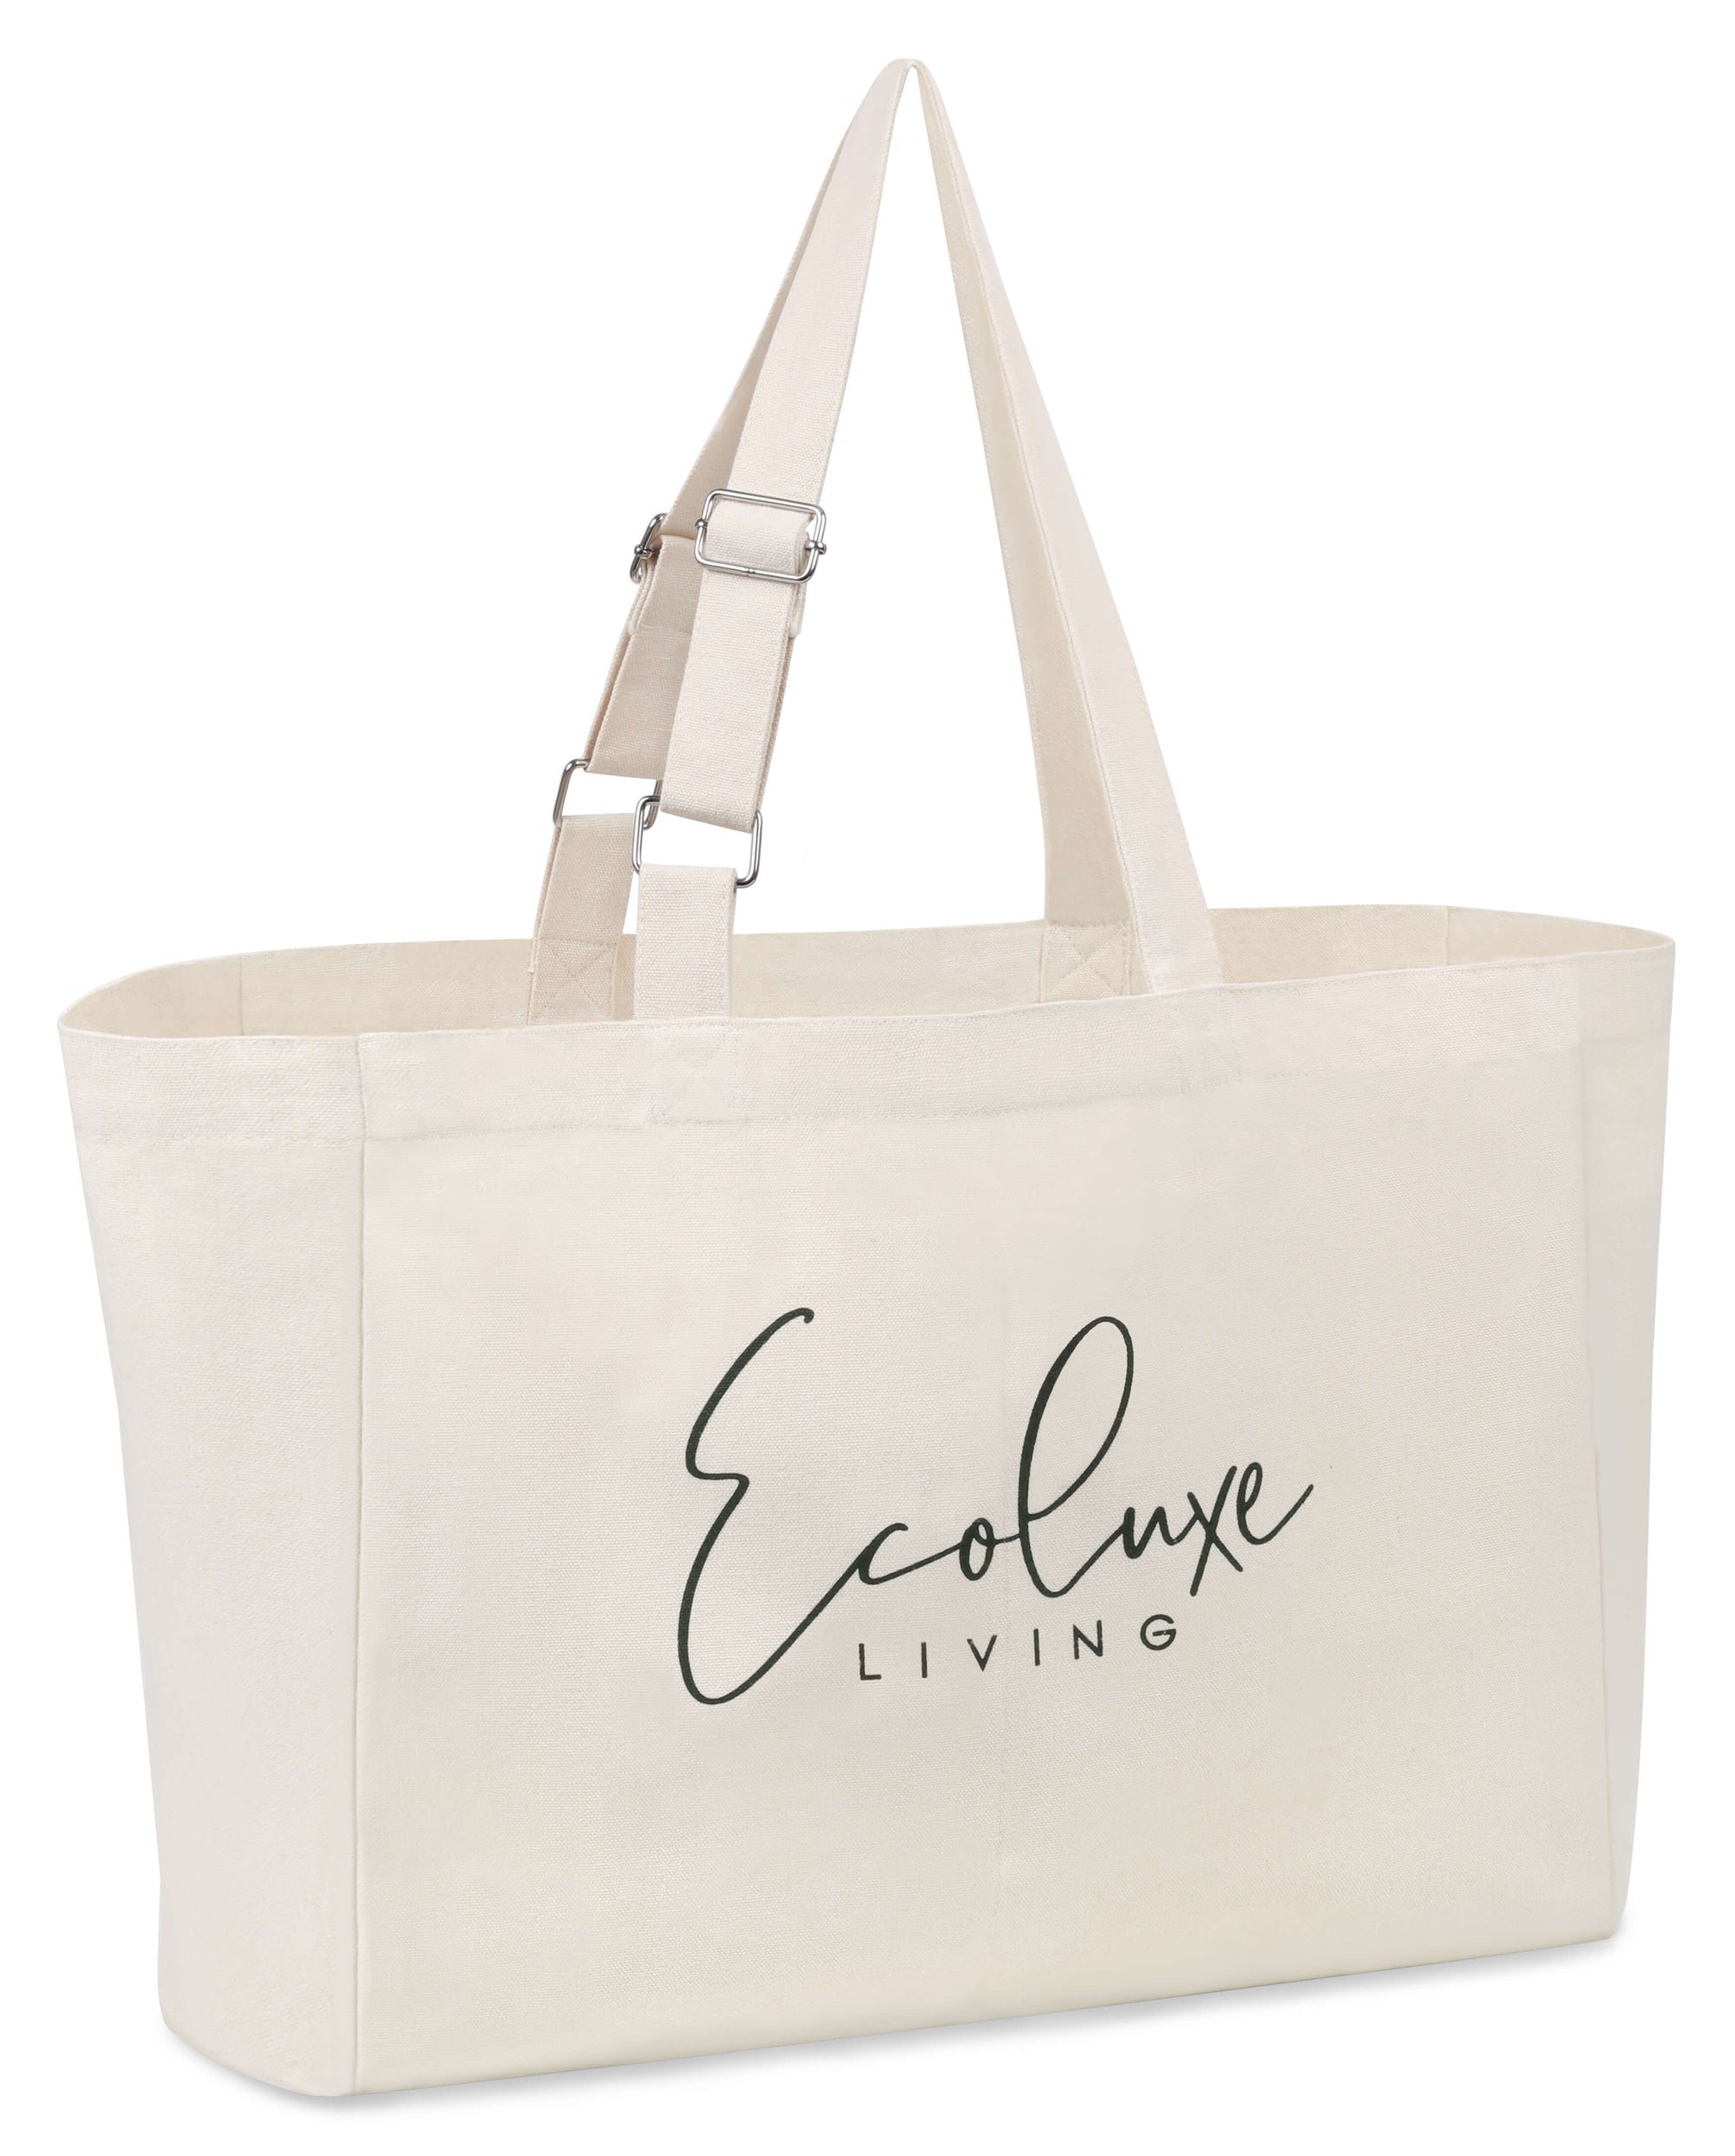 Large Tote w/ Adjustable Strap and 6 Internal Pockets - EcoLuxe Living